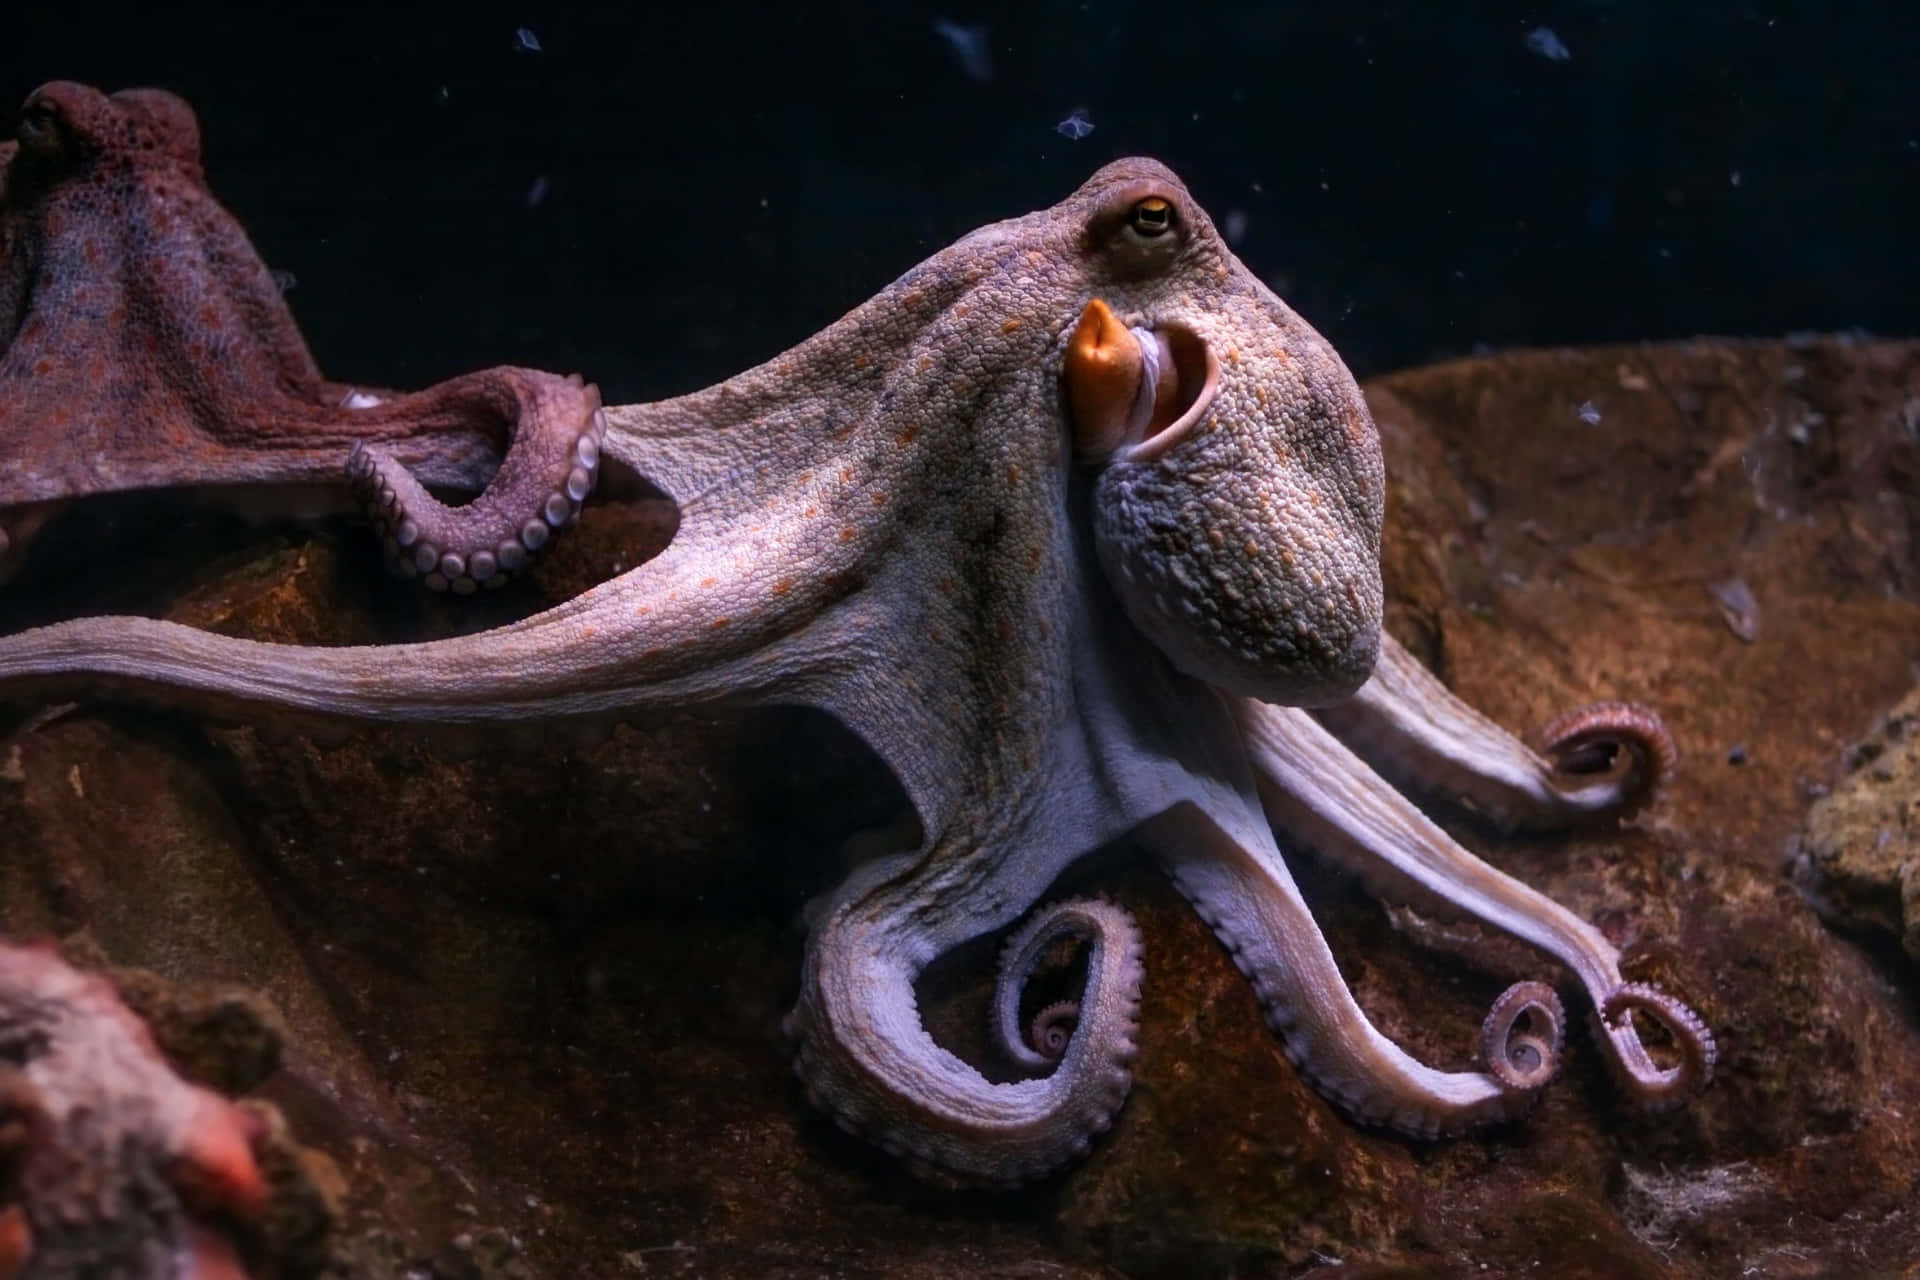 A mysterious and colorful Octopus